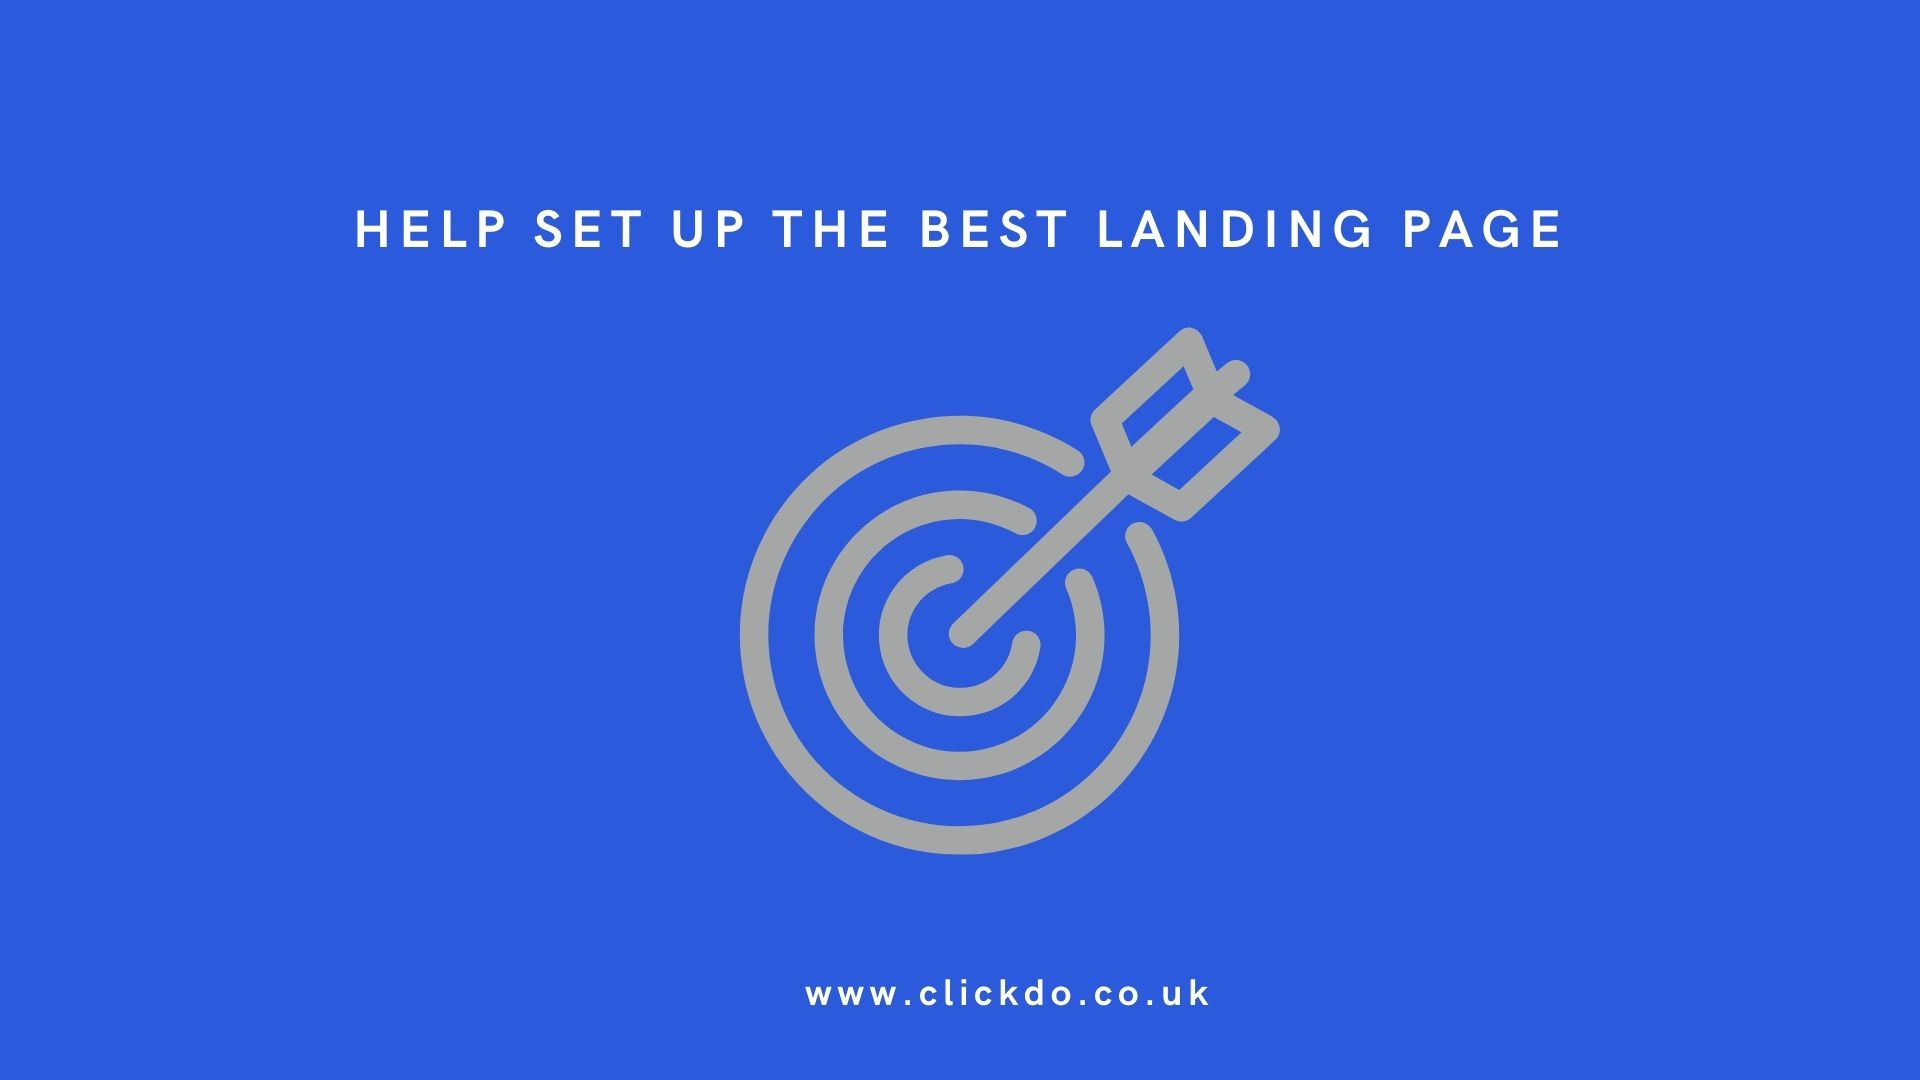 Help set up the best landing page